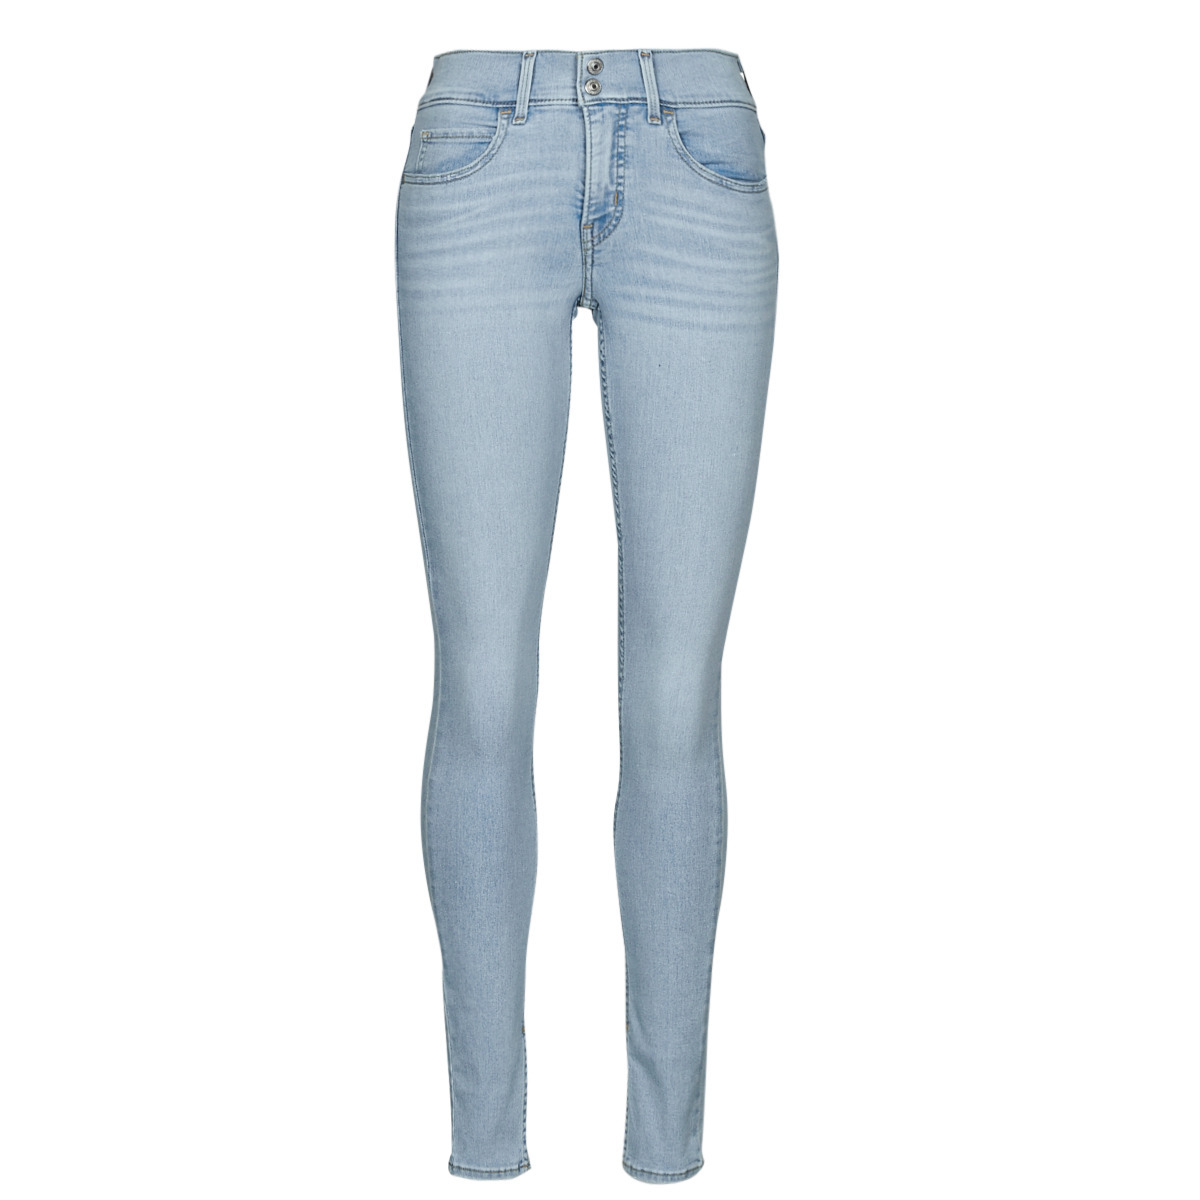 Levi's Skinny Jeans Blue for Woman by Spartoo GOOFASH